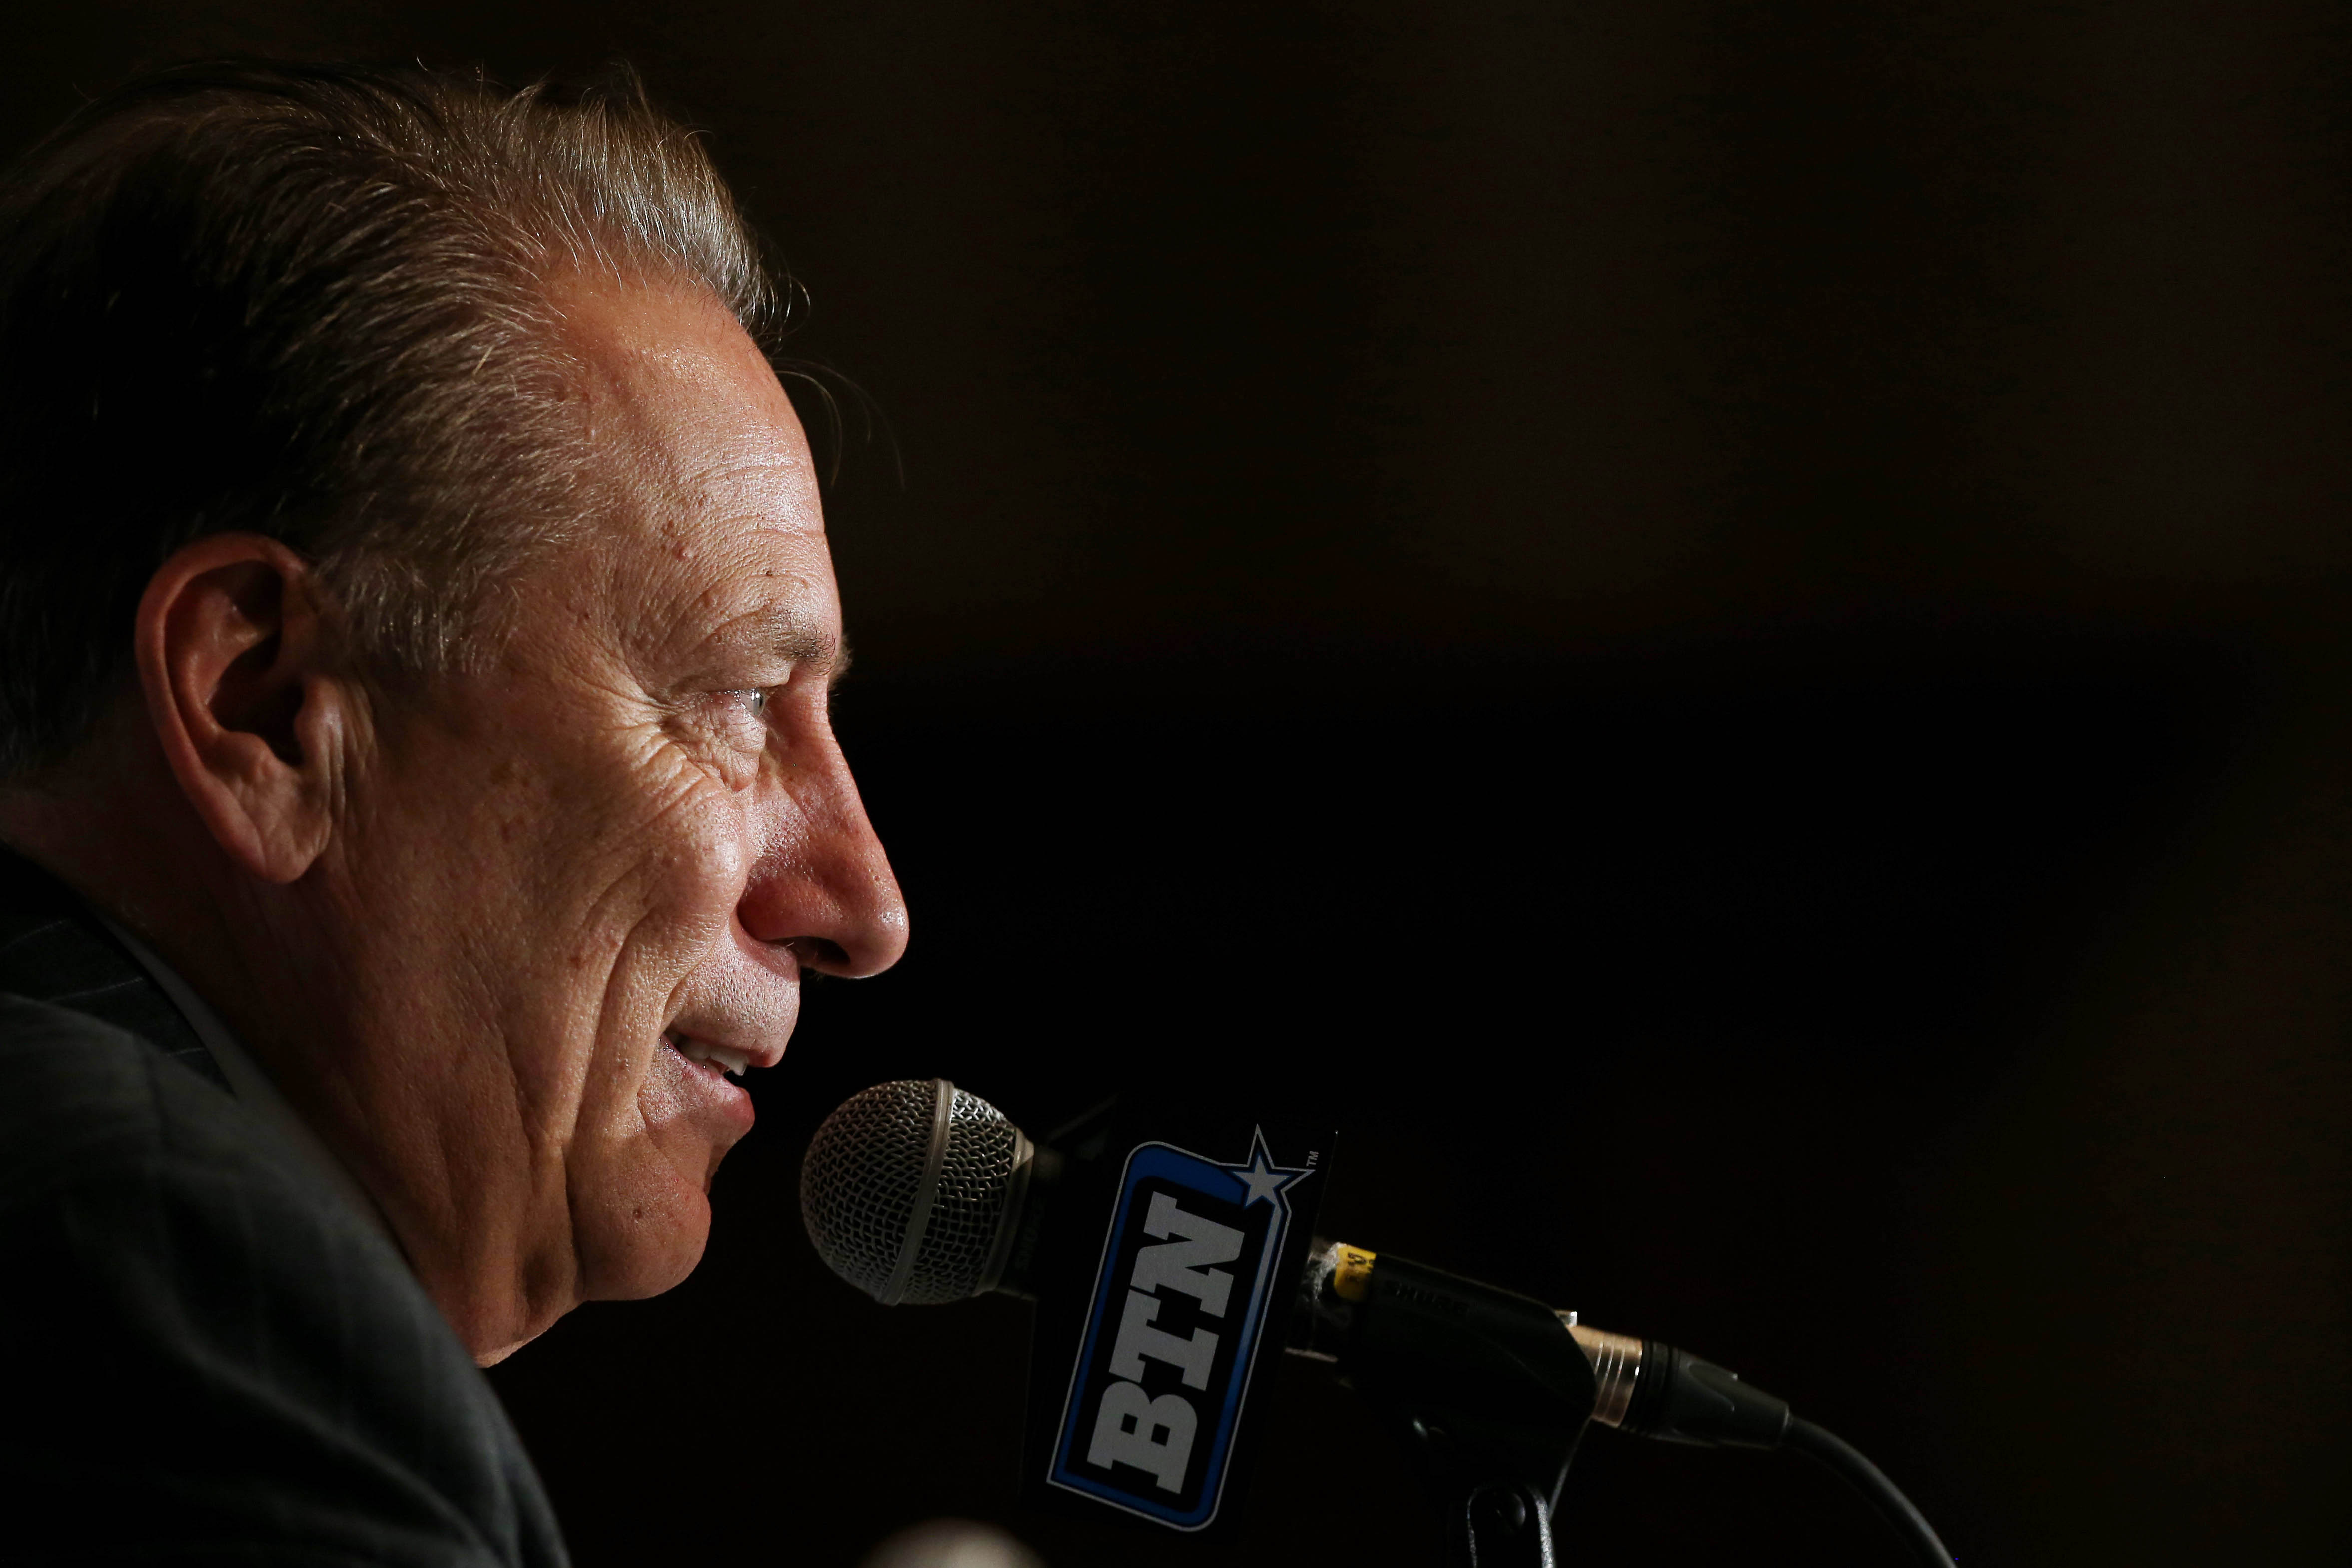 Yes, Michigan State's Tom Izzo subscribes to the 5-second rule